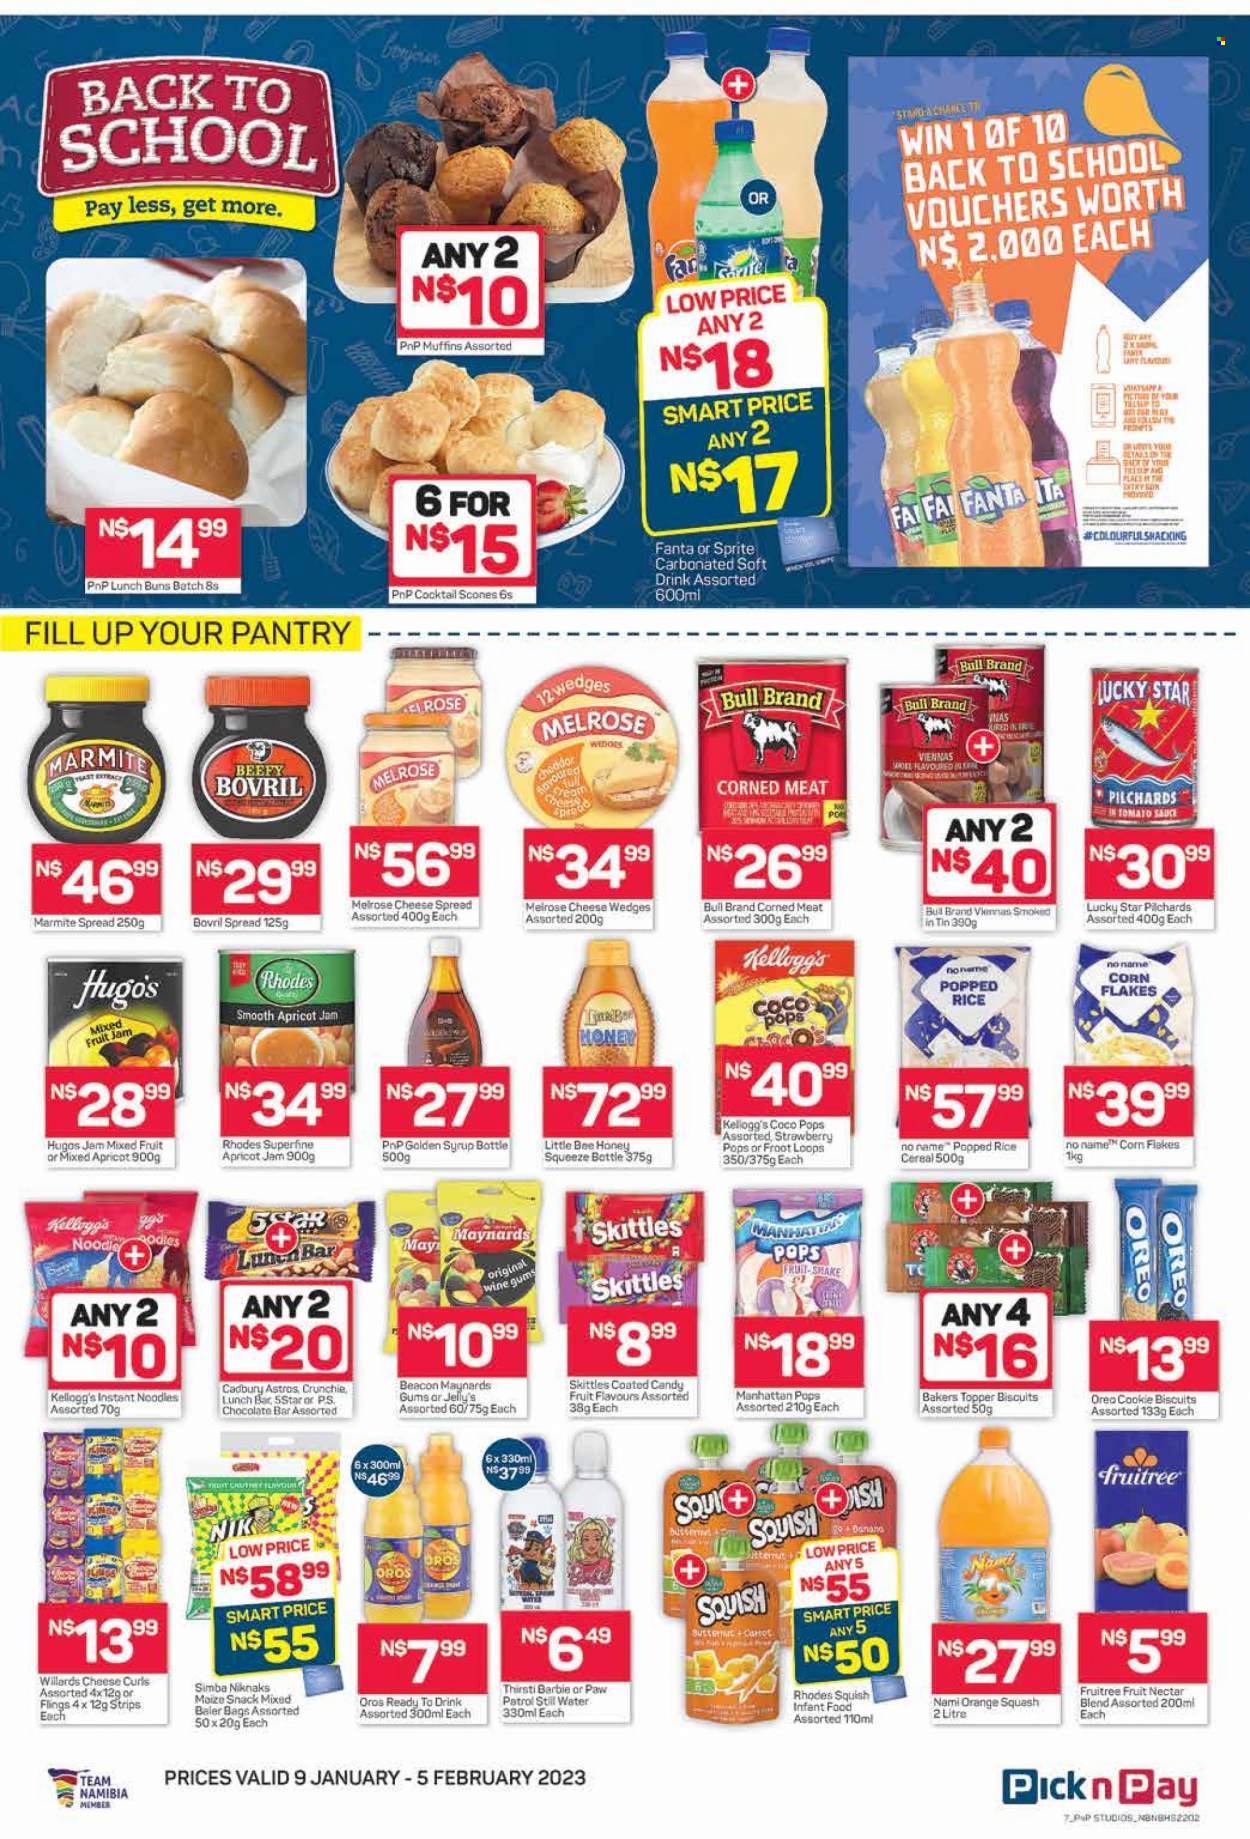 thumbnail - Pick n Pay catalogue  - 09/01/2023 - 05/02/2023 - Sales products - buns, muffin, sardines, No Name, instant noodles, noodles, vienna sausage, cheese spread, Melrose, Oreo, shake, yeast, strips, Paw Patrol, snack, Kellogg's, biscuit, Cadbury, Skittles, chocolate bar, maize snack, Simba, corned meat, cereals, corn flakes, coco pops, rice, apricot jam, honey, fruit jam, syrup, Sprite, Fanta, fruit nectar, soft drink, Oros, orange squash, mineral water, bottled water, carbonated soft drink, rosé wine, Bakers. Page 7.